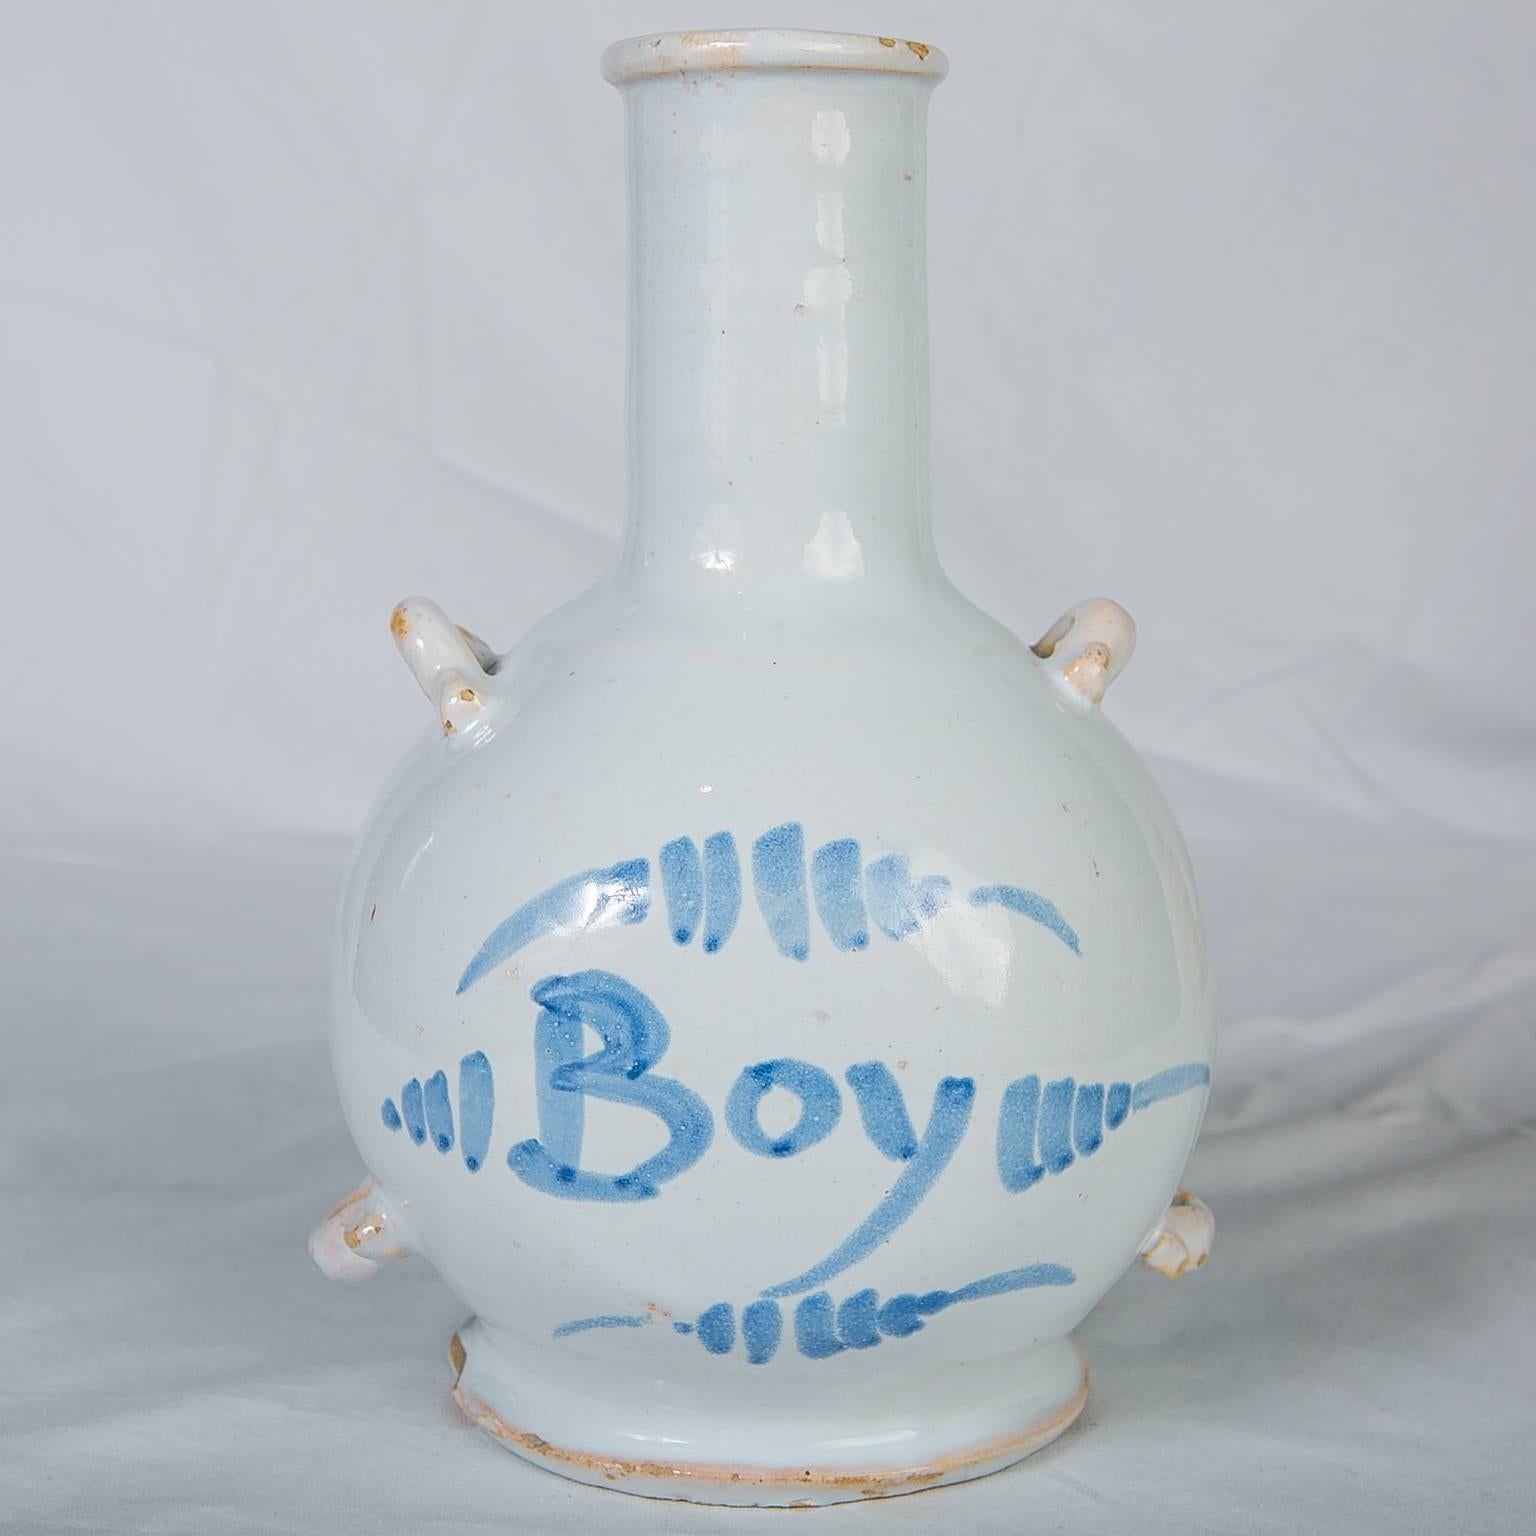 Painted in underglaze blue with the word 